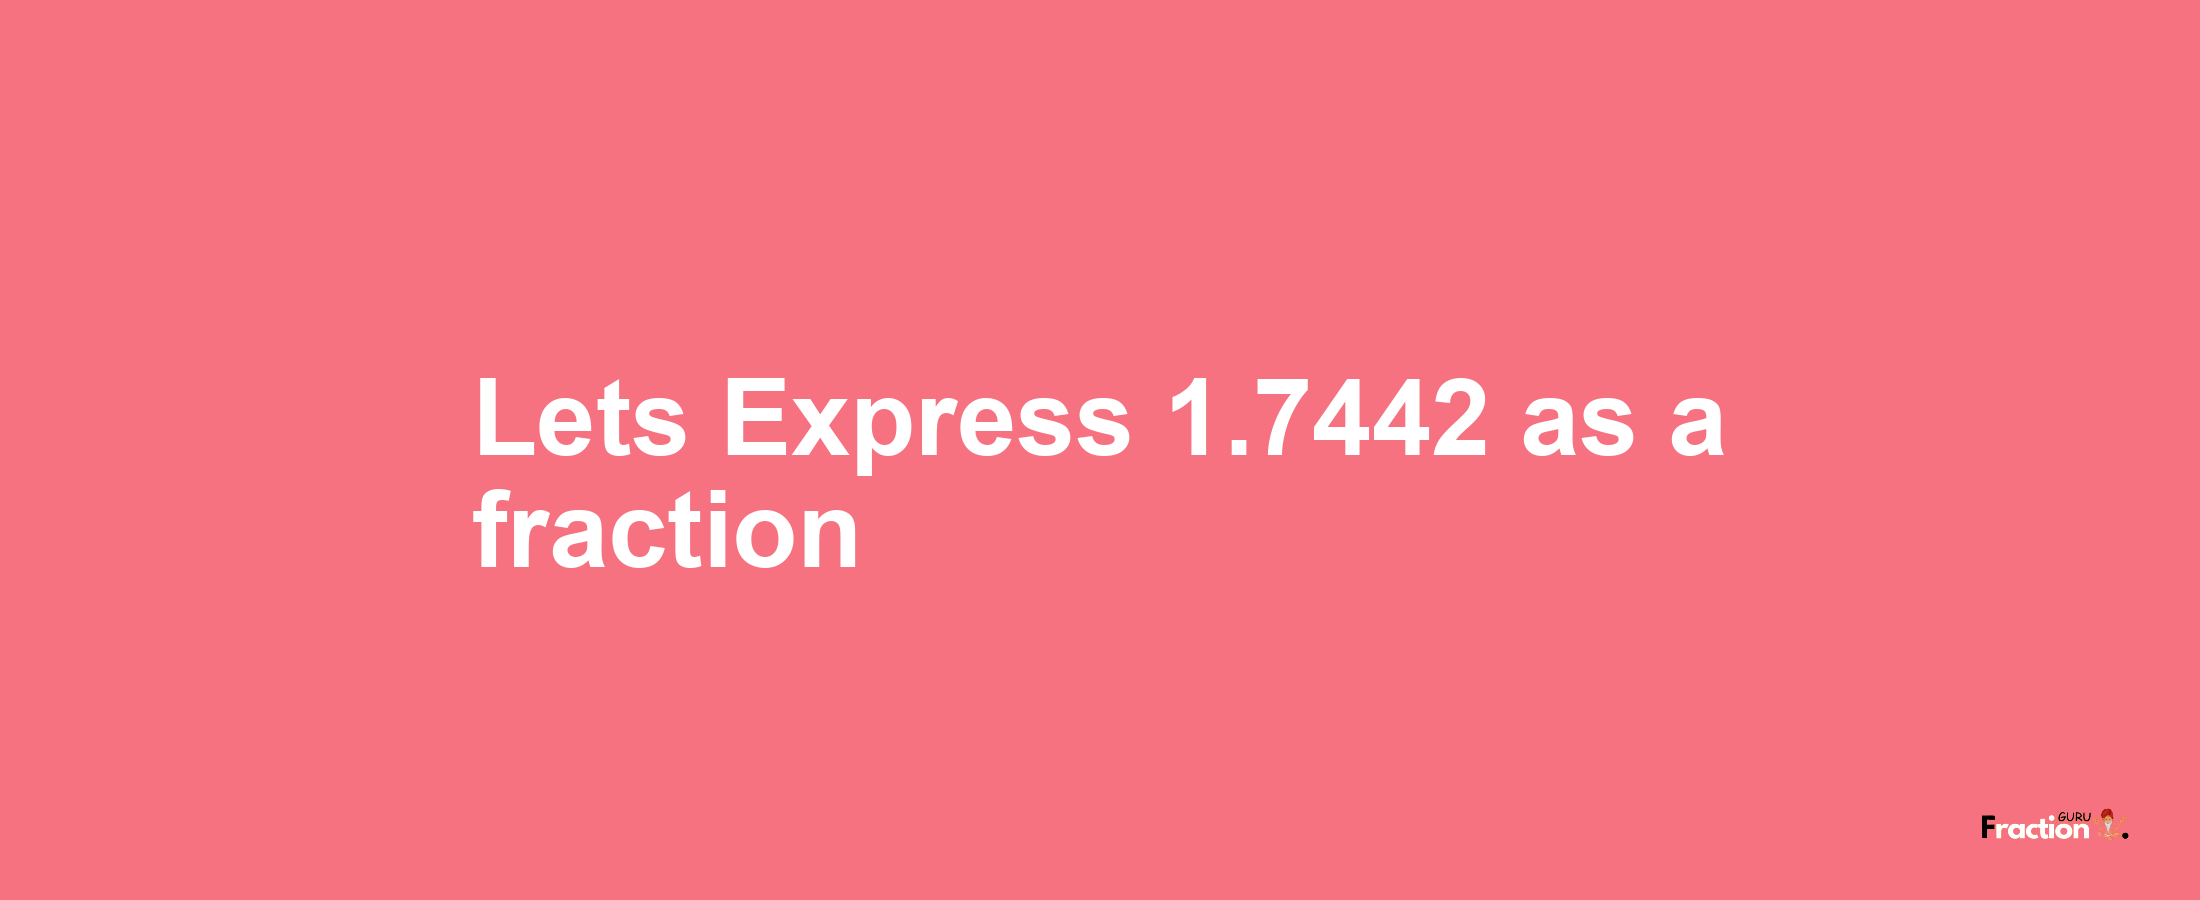 Lets Express 1.7442 as afraction